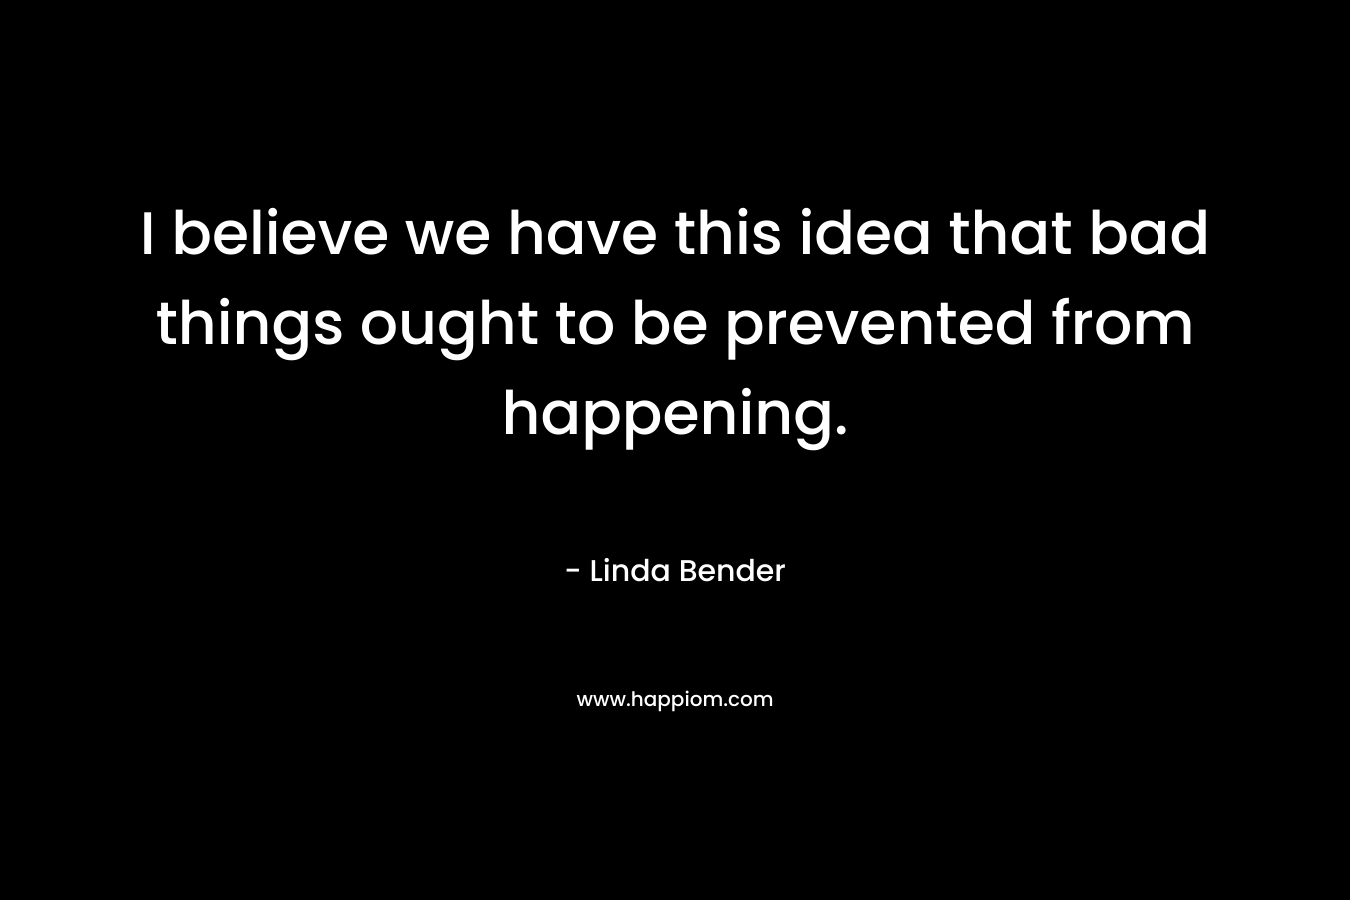 I believe we have this idea that bad things ought to be prevented from happening.